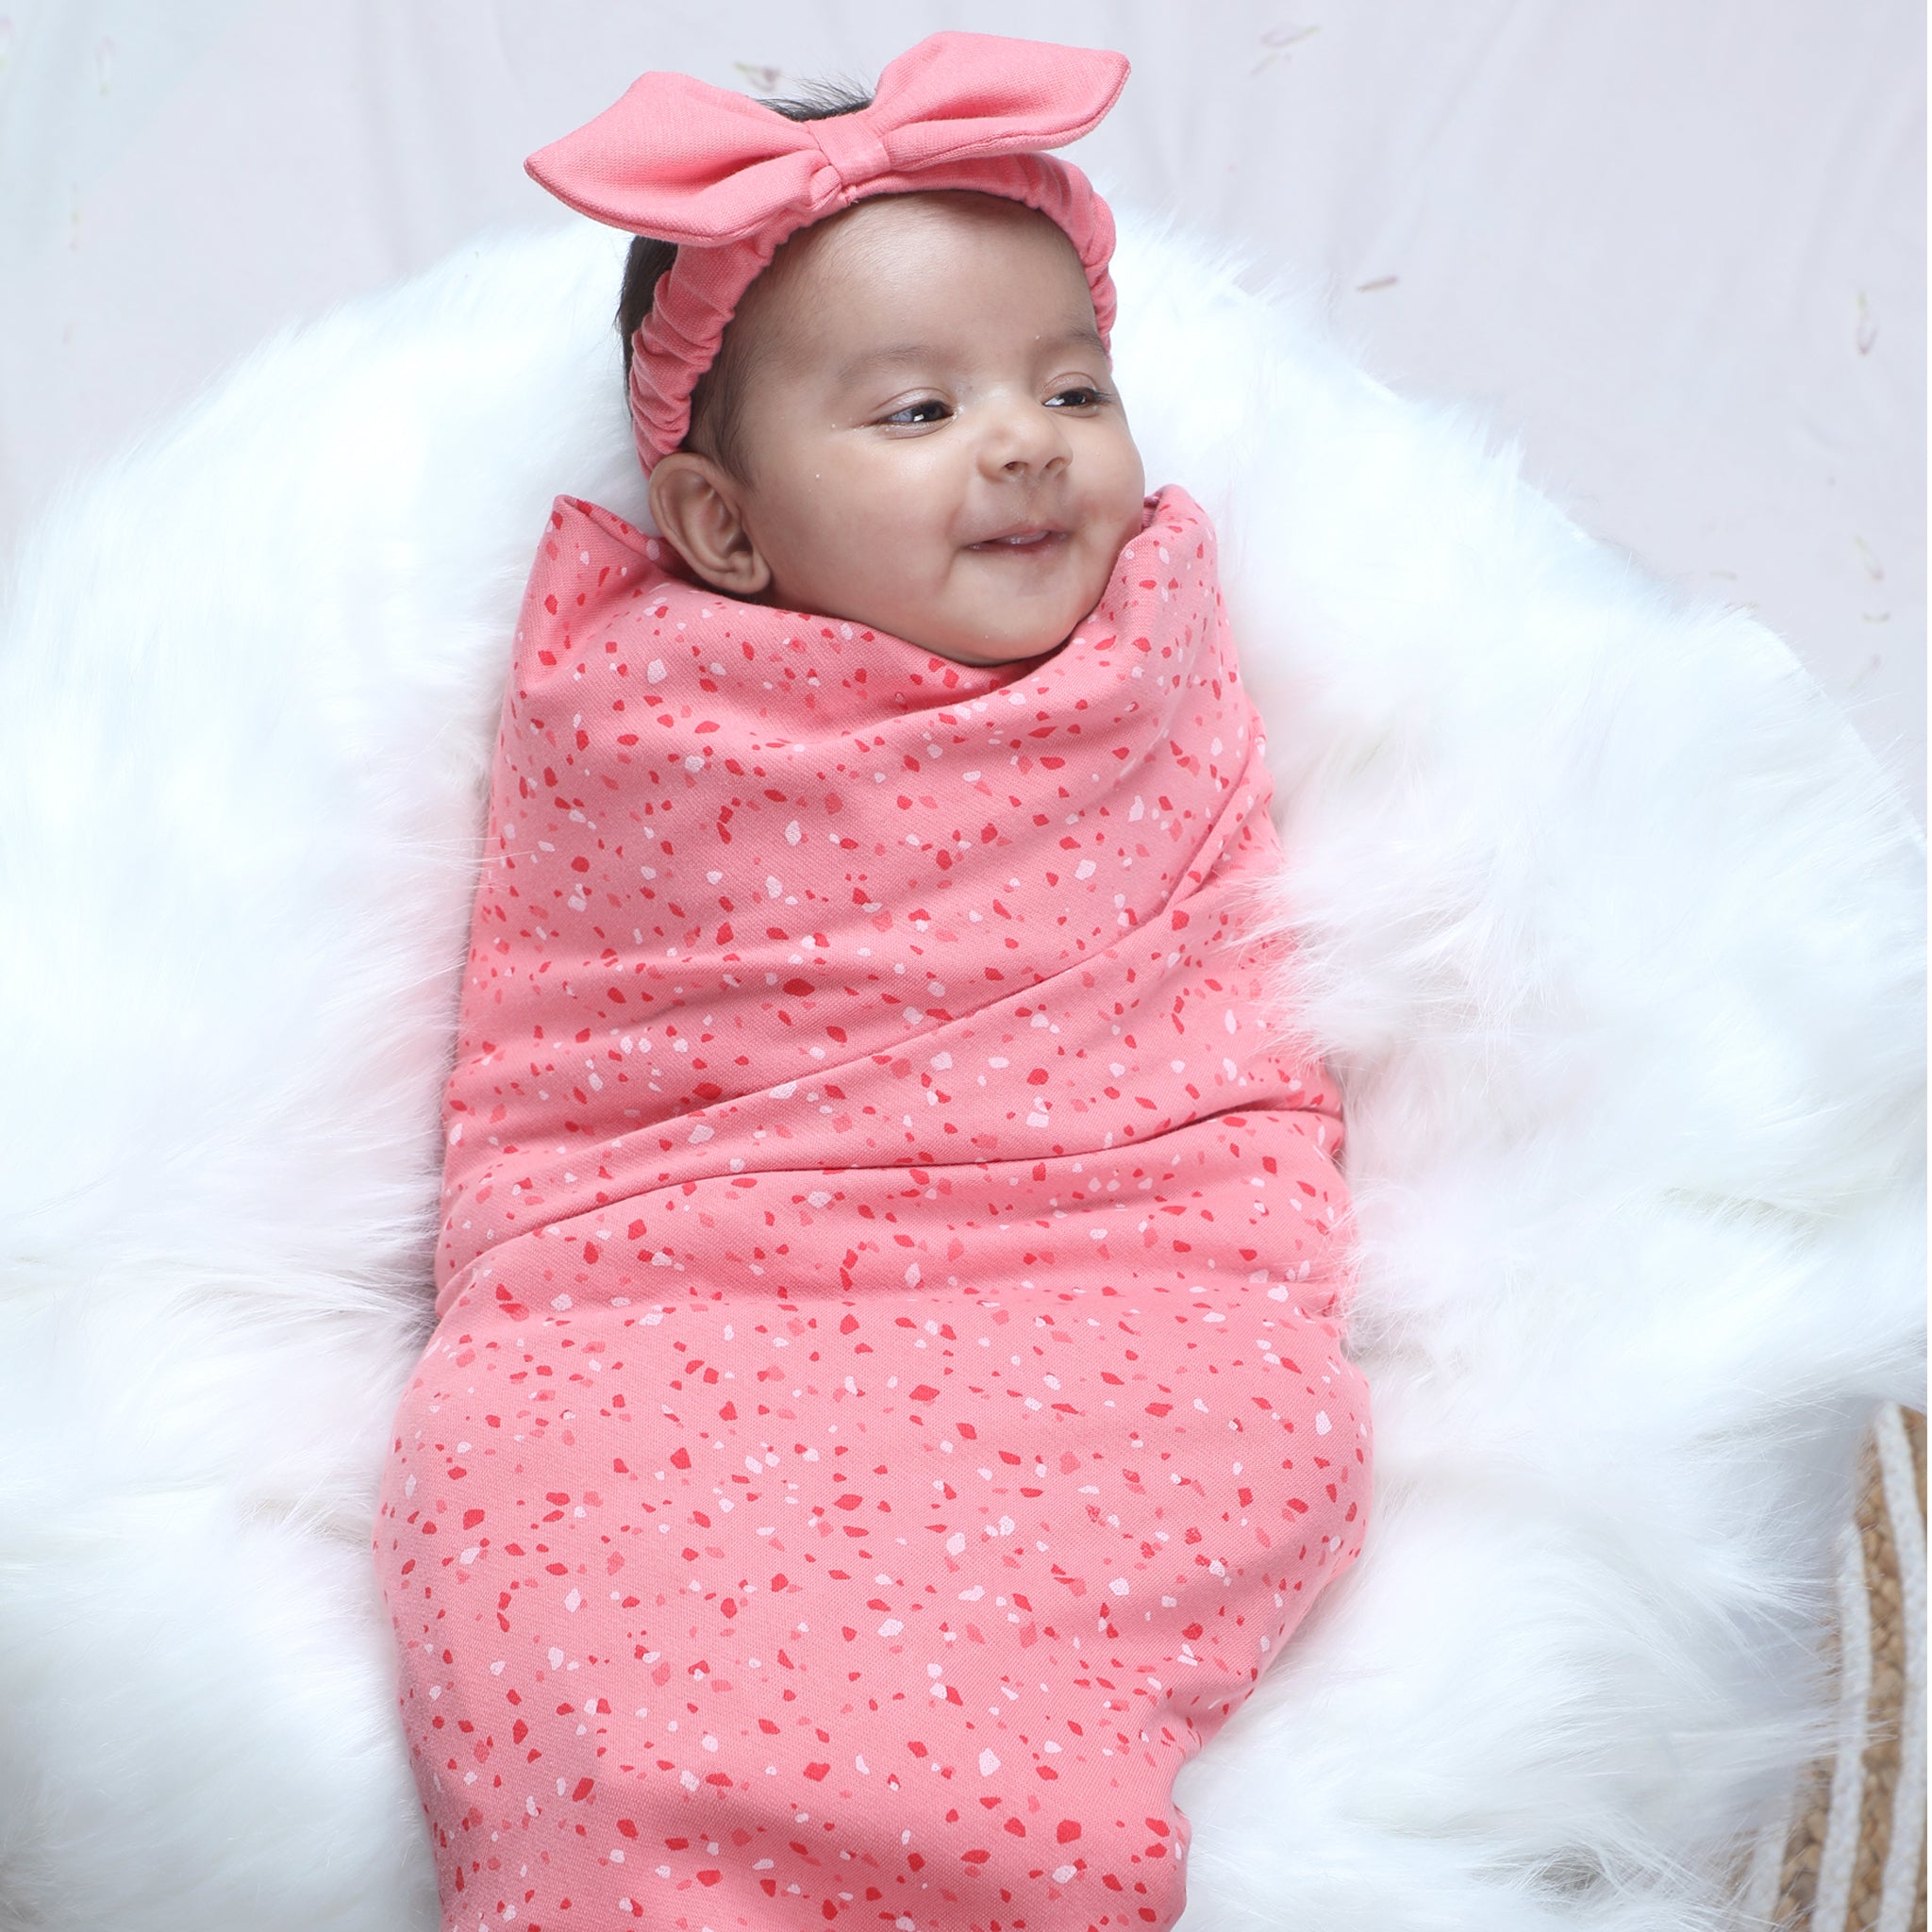 DESSERT ROSE TERRAZZO STRETCHY JERSEY SWADDLE BLANKET